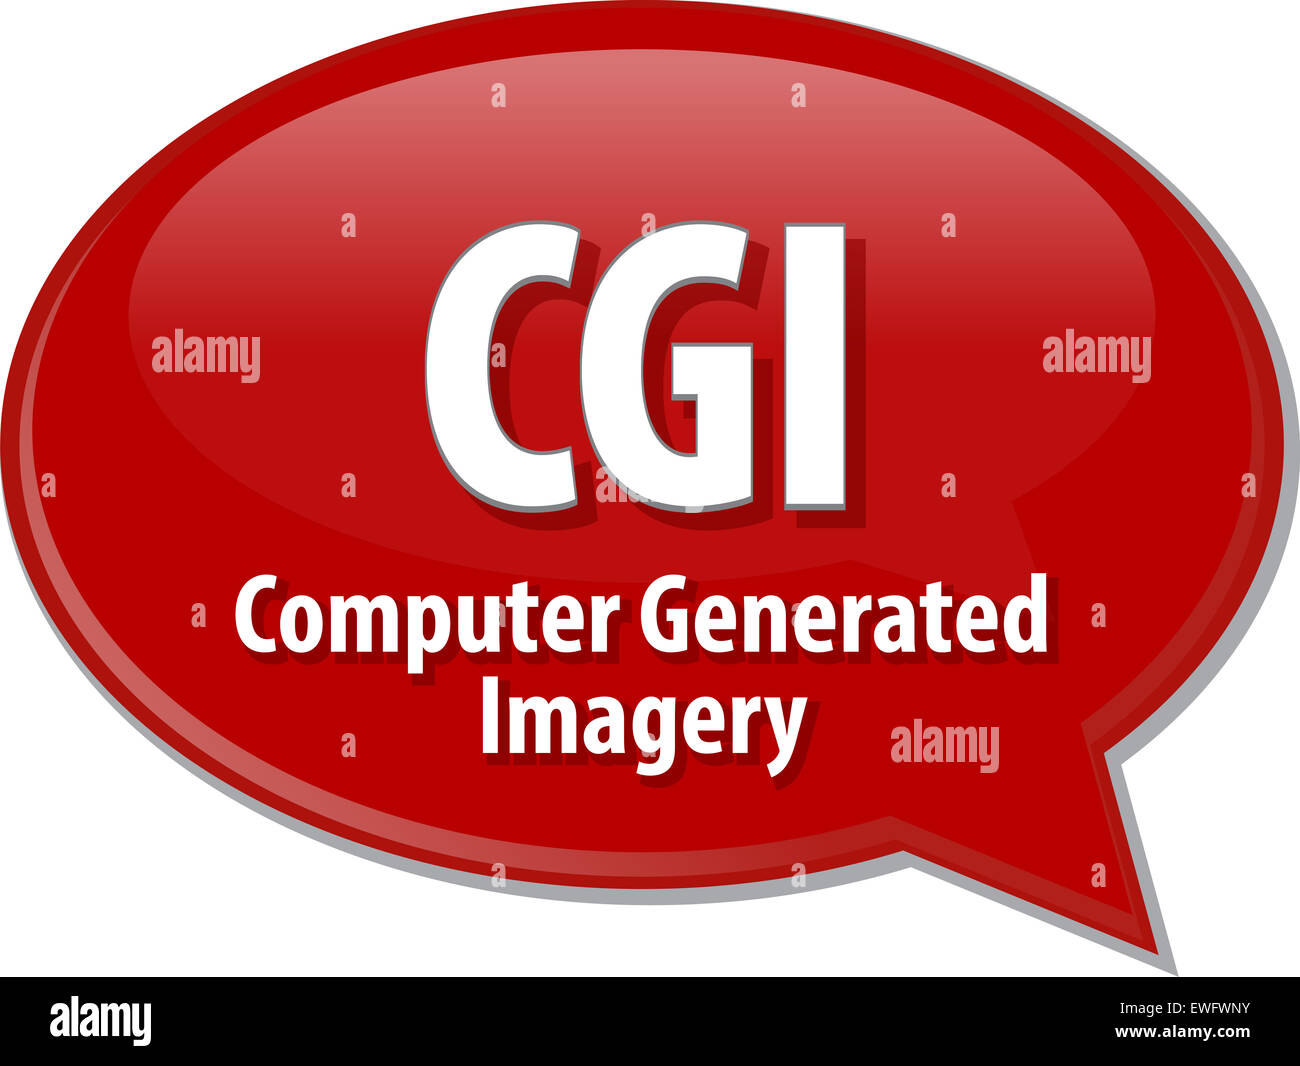 Speech bubble illustration of information technology acronym abbreviation term definition CGI Computer Generated Imagery Stock Photo